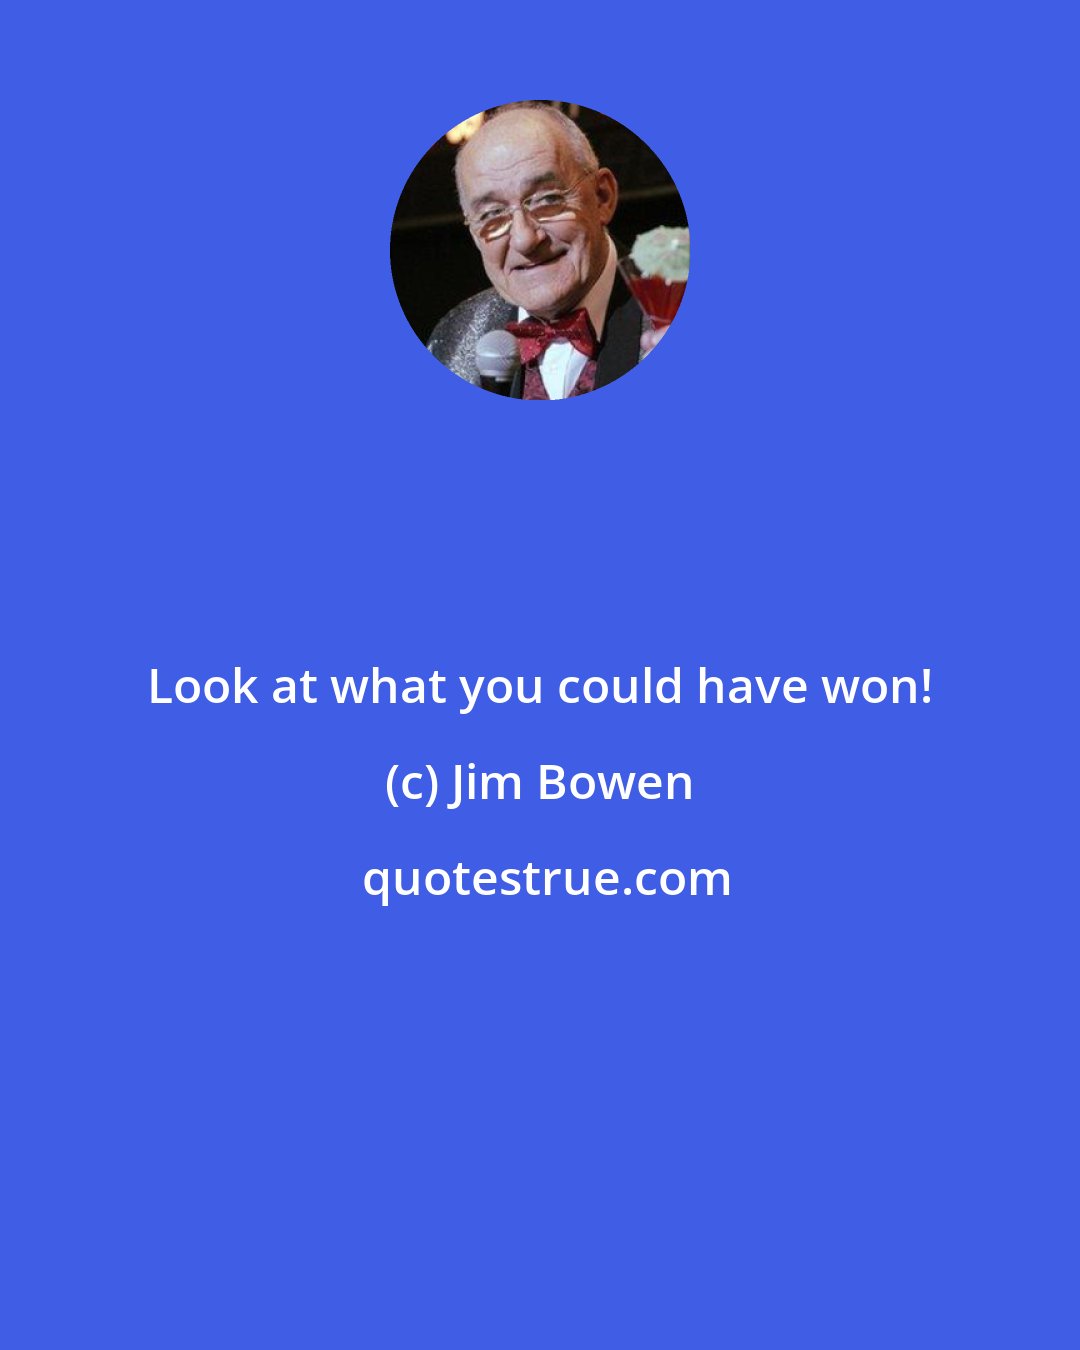 Jim Bowen: Look at what you could have won!